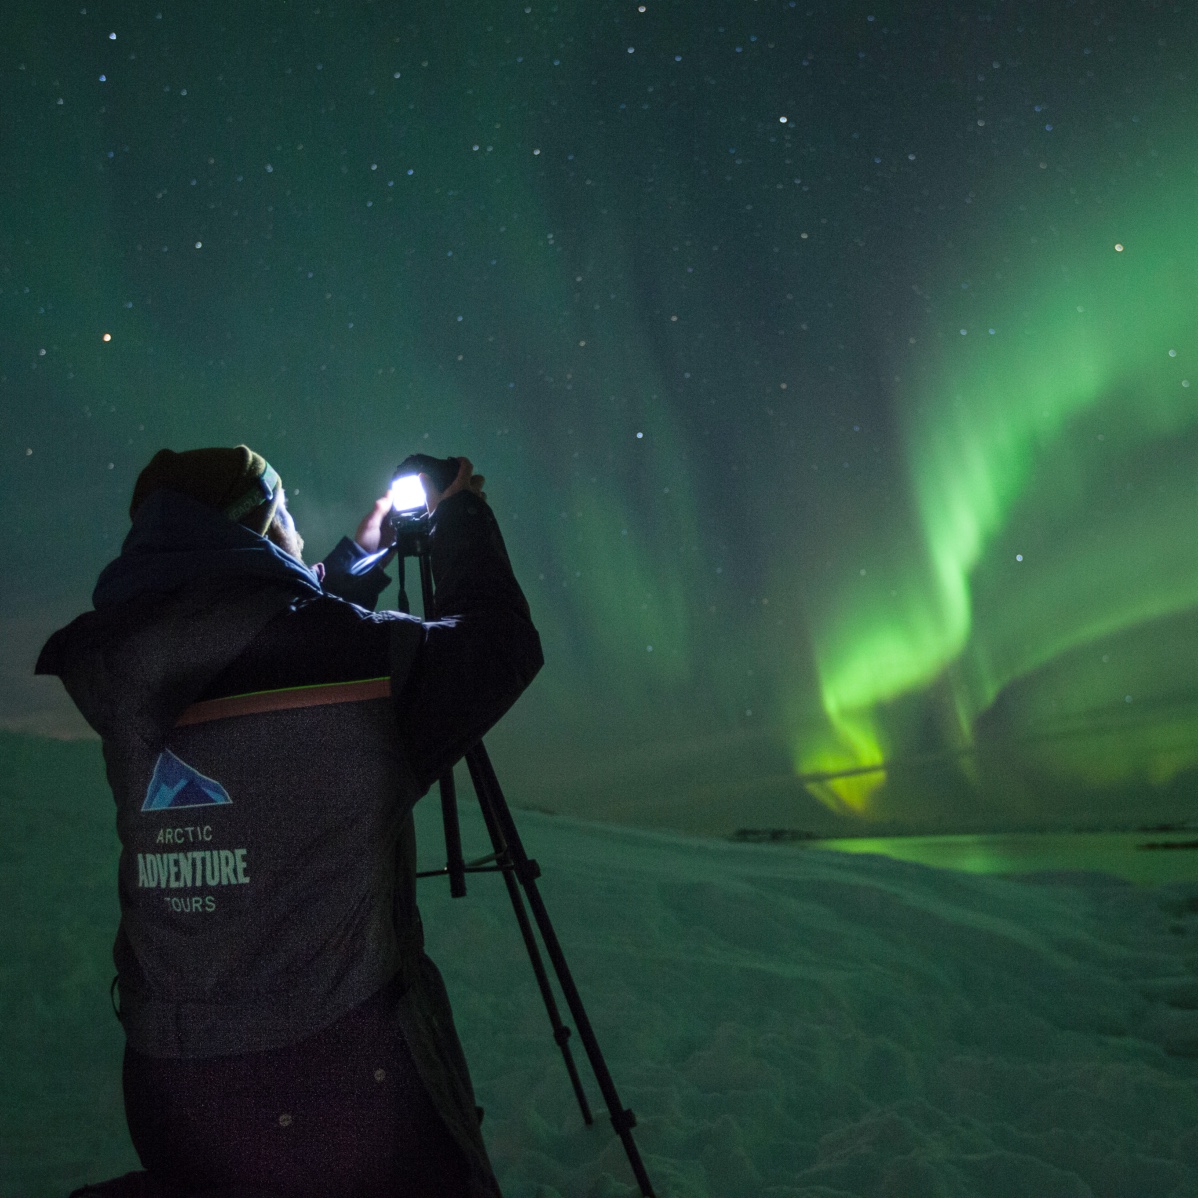 Photographing northern lights